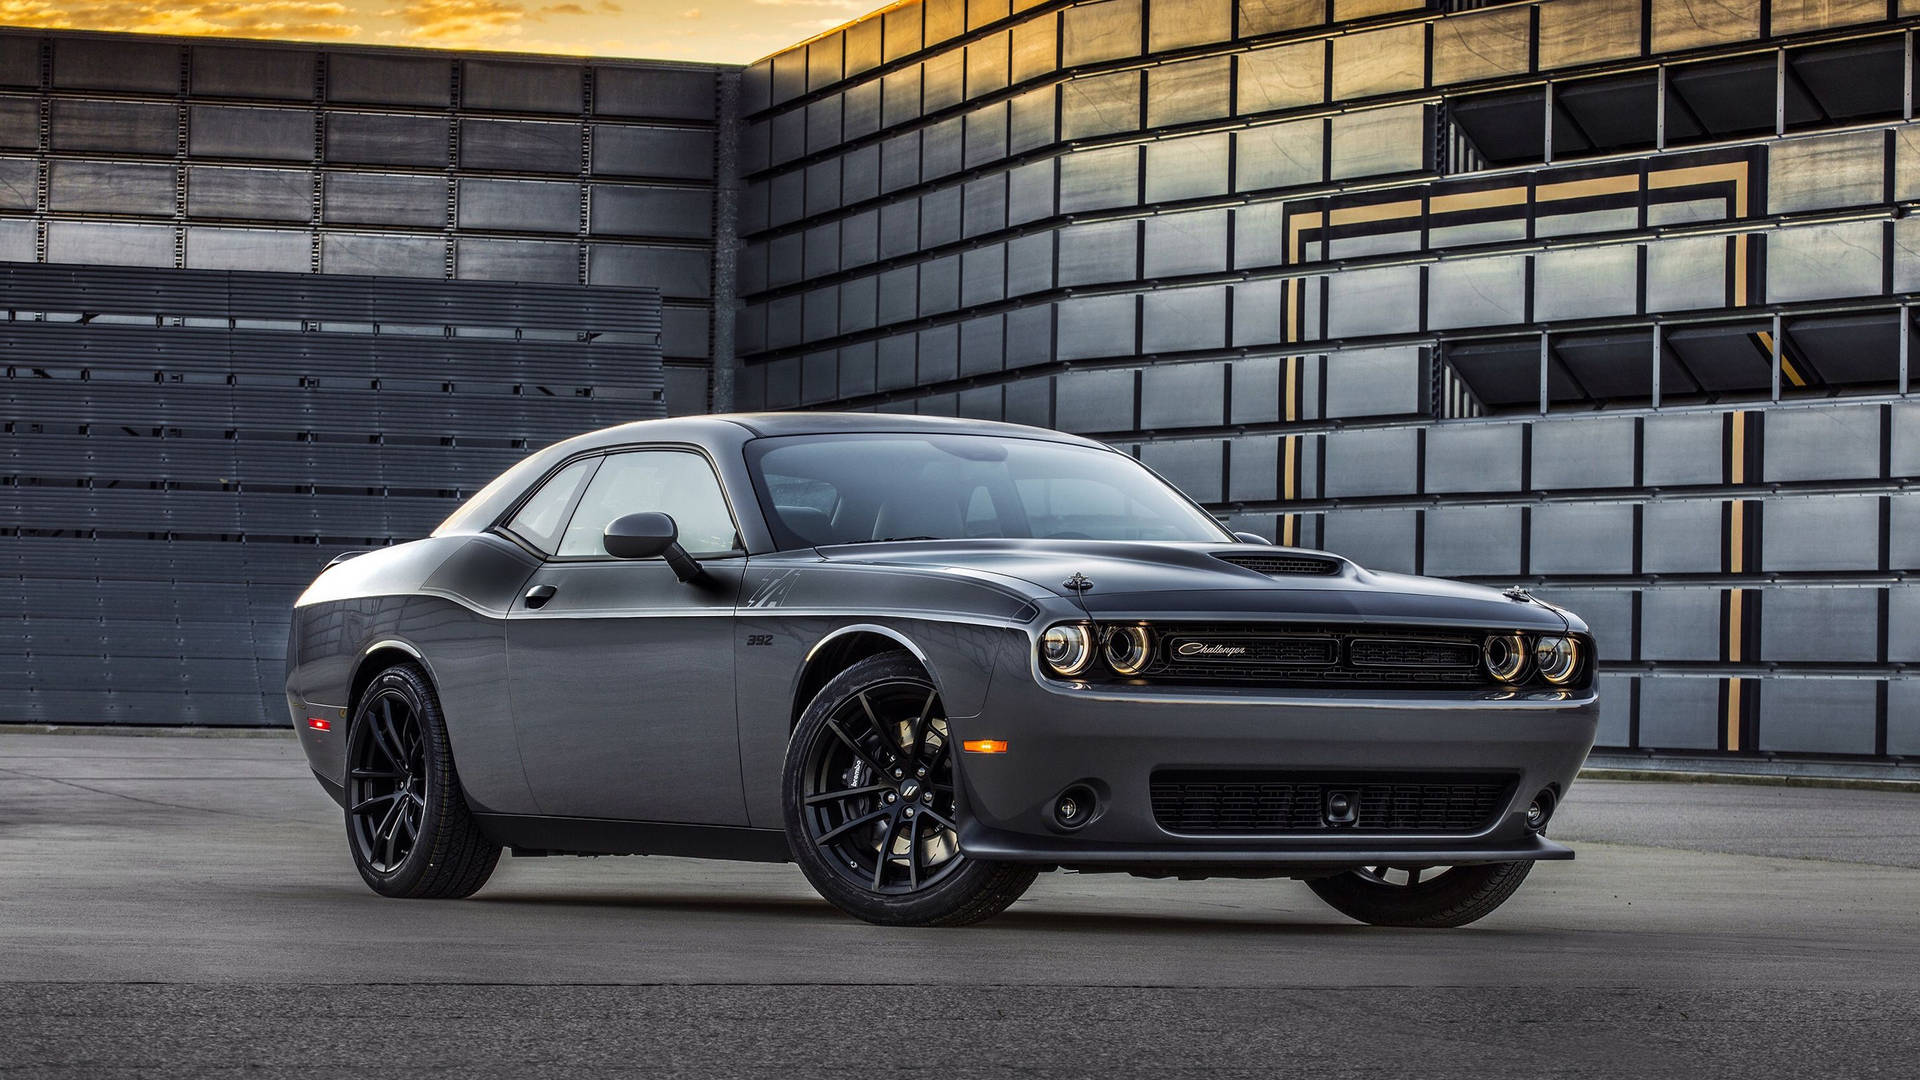 Dodge Challenger With Wide Body Design Background